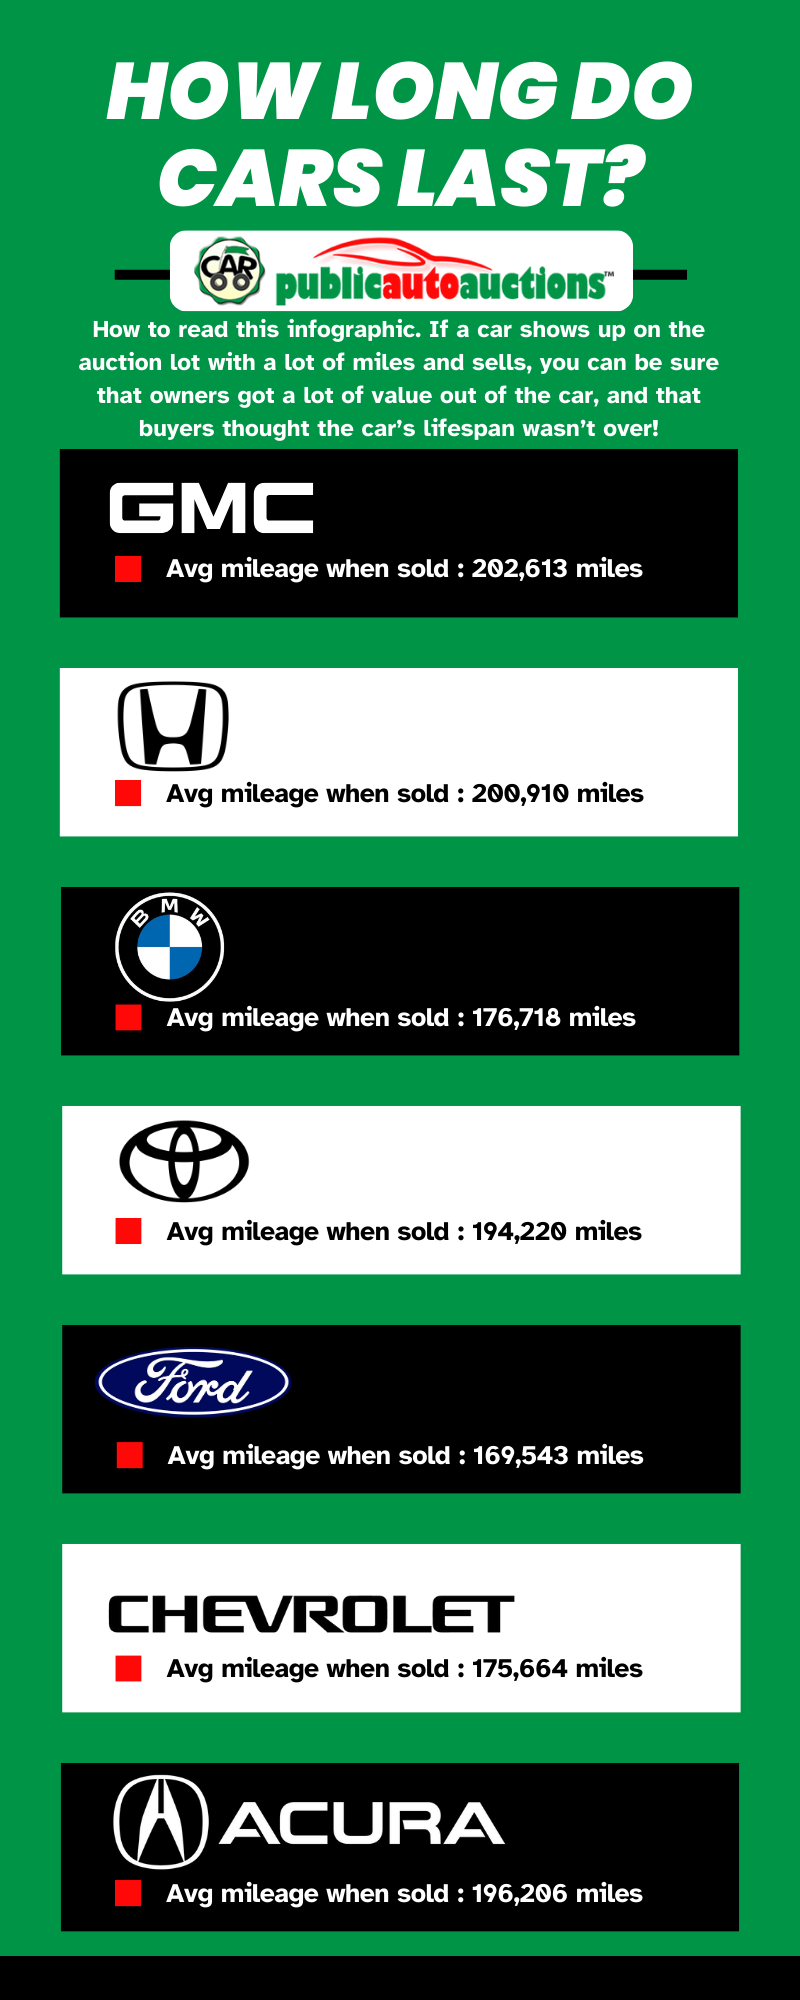 An infographic on the lifespan of popular car brands.